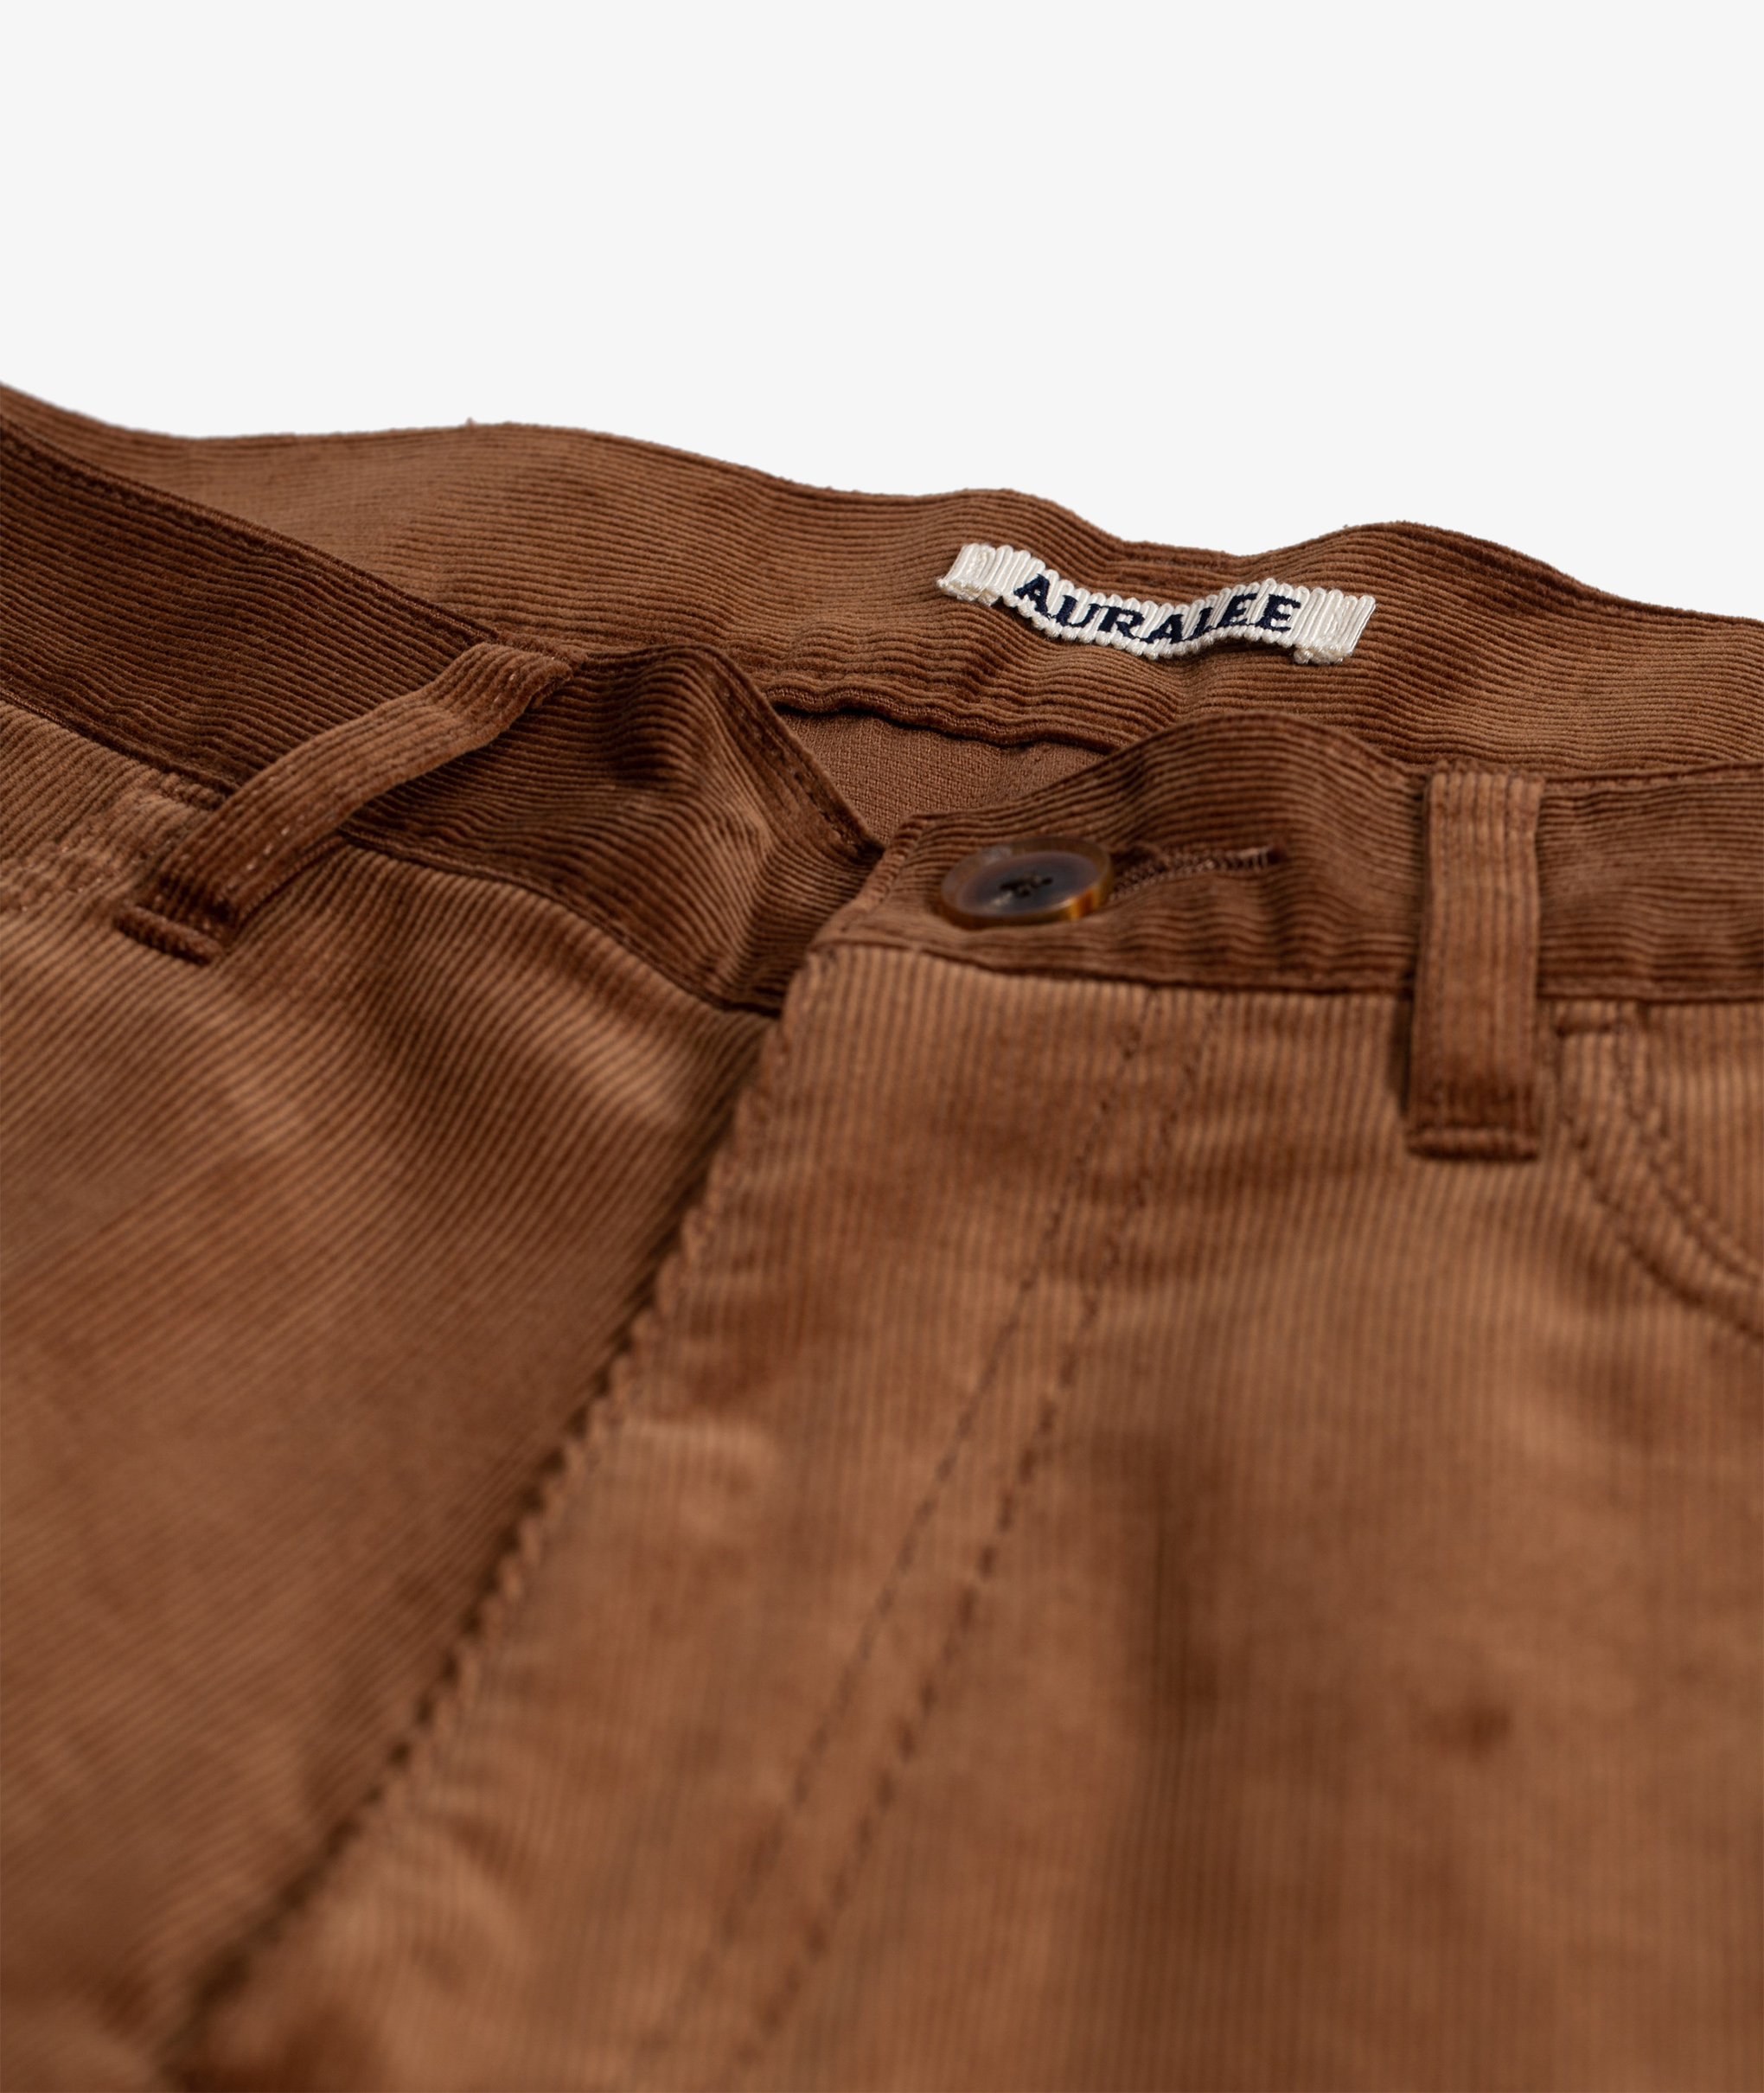 Norse Store | Shipping Worldwide - Auralee Finx Corduroy Pants